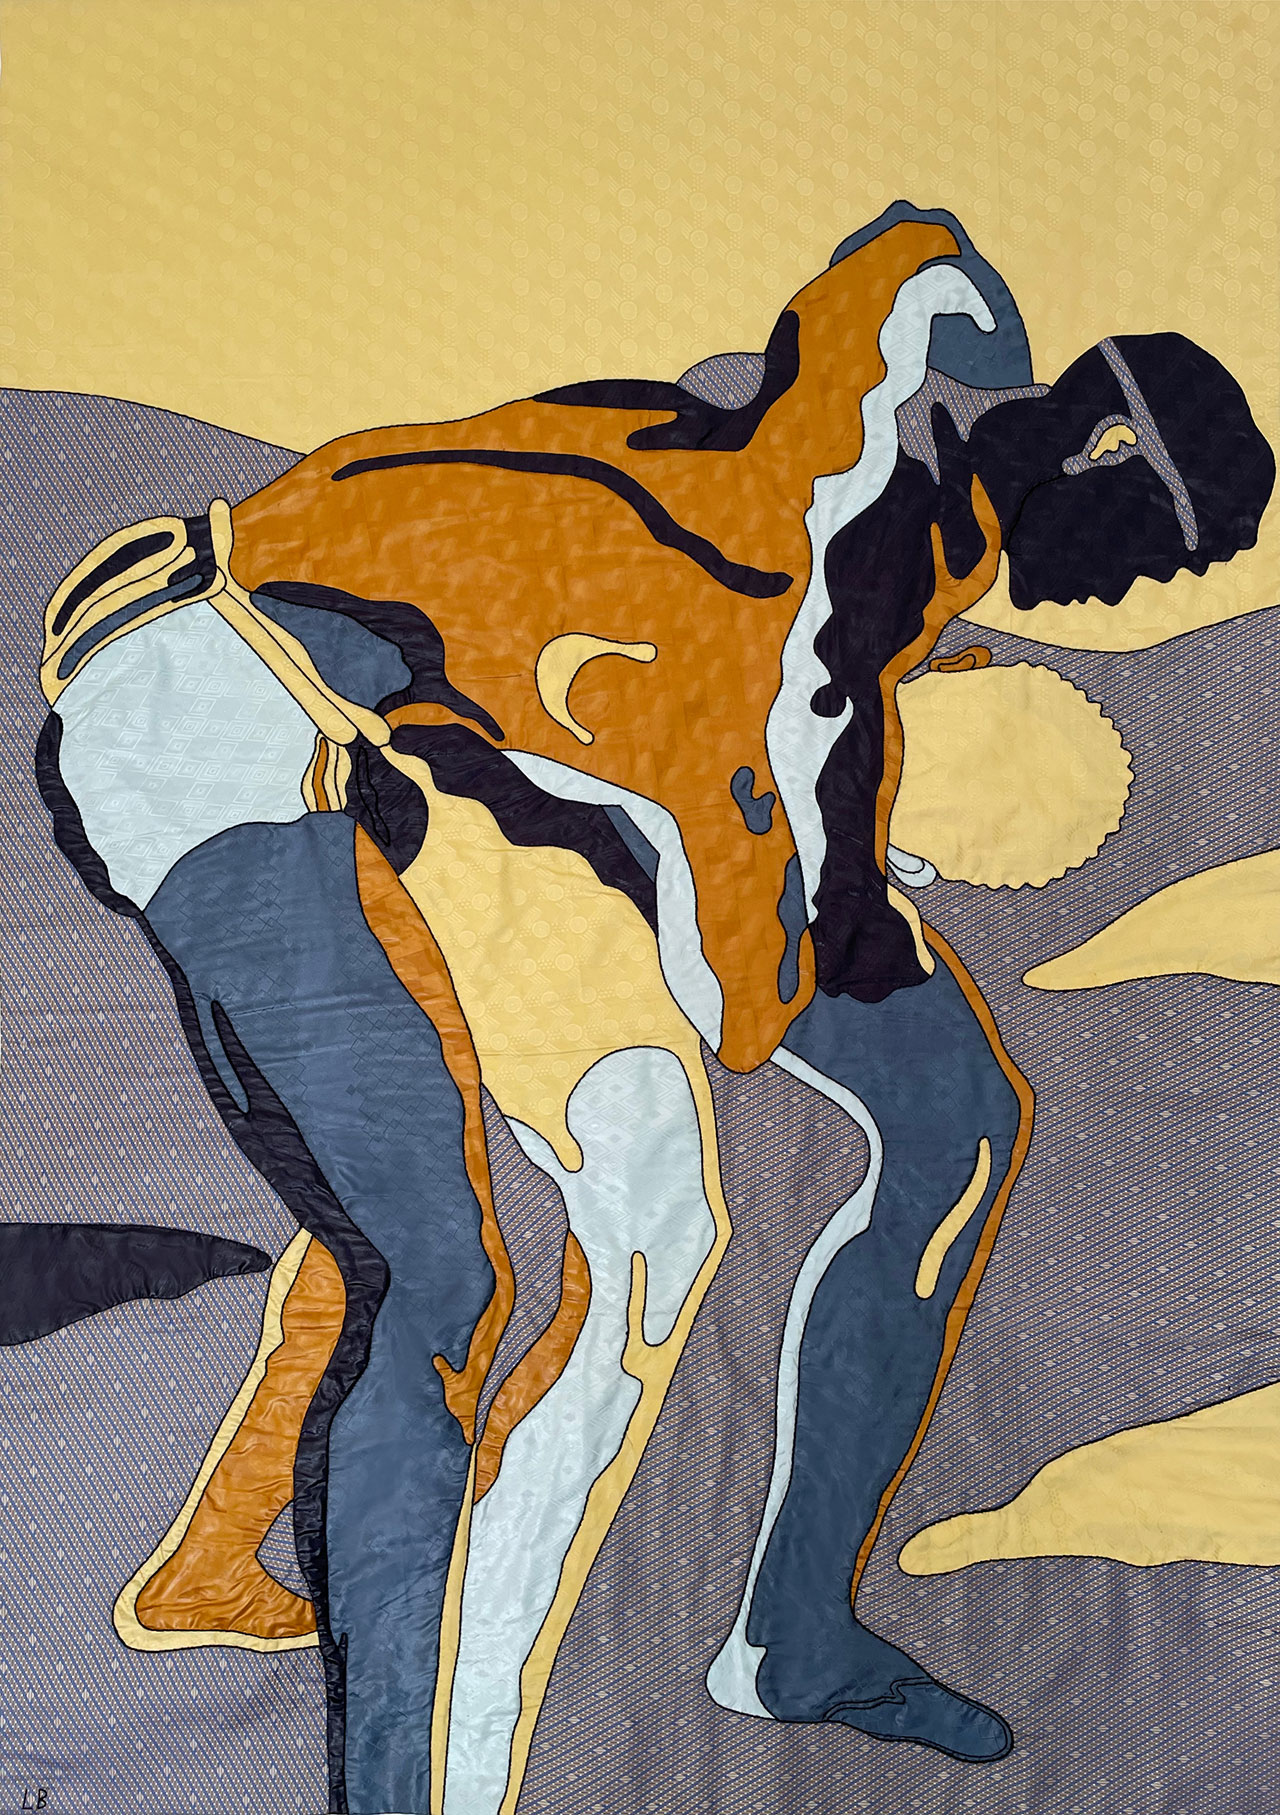 Louis Barthélemy, KHAYAMIYA 10 - MÊLÉE from the Lutteurs/Wrestlers series, 2021. Appliquéd and hand embroidered «bazins» on cotton canvas. Unique edition.